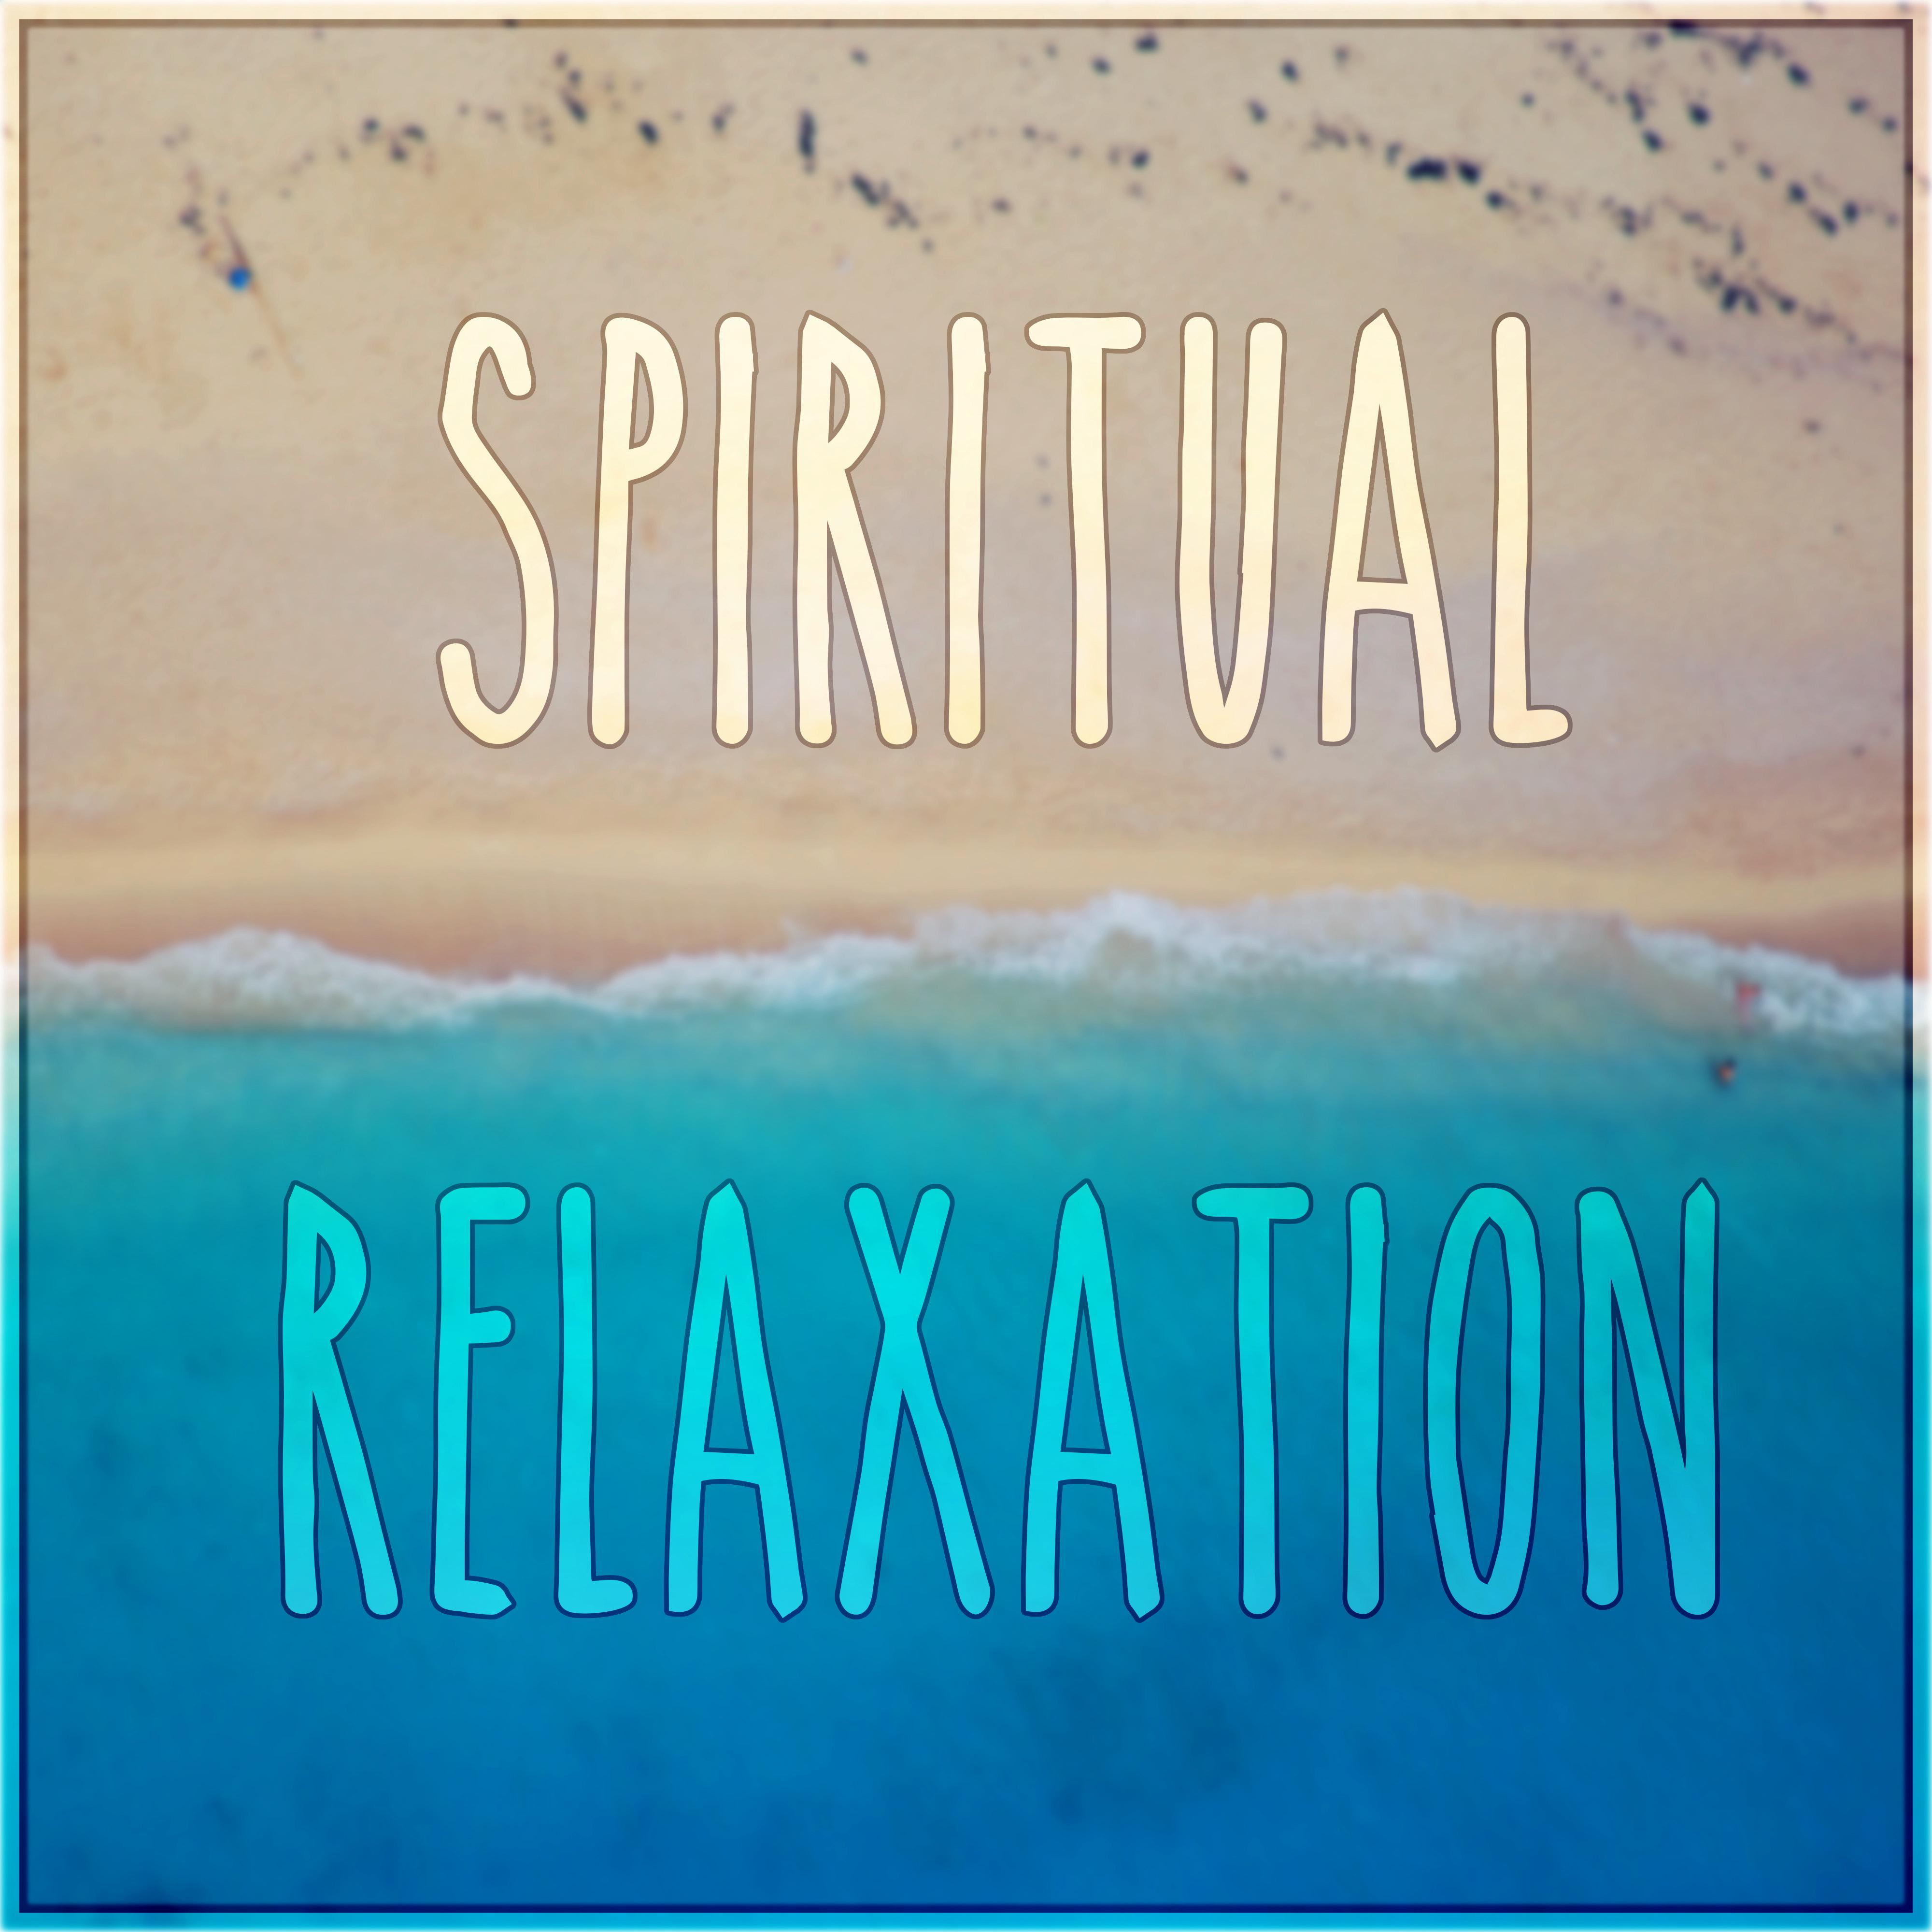 Spiritual Relaxation - New Age Music to Relax, Healing Sounds to Cure Insomnia, Chanting Om, Yoga Meditation, White Noises for Deep Sleep, Reflections, Relax